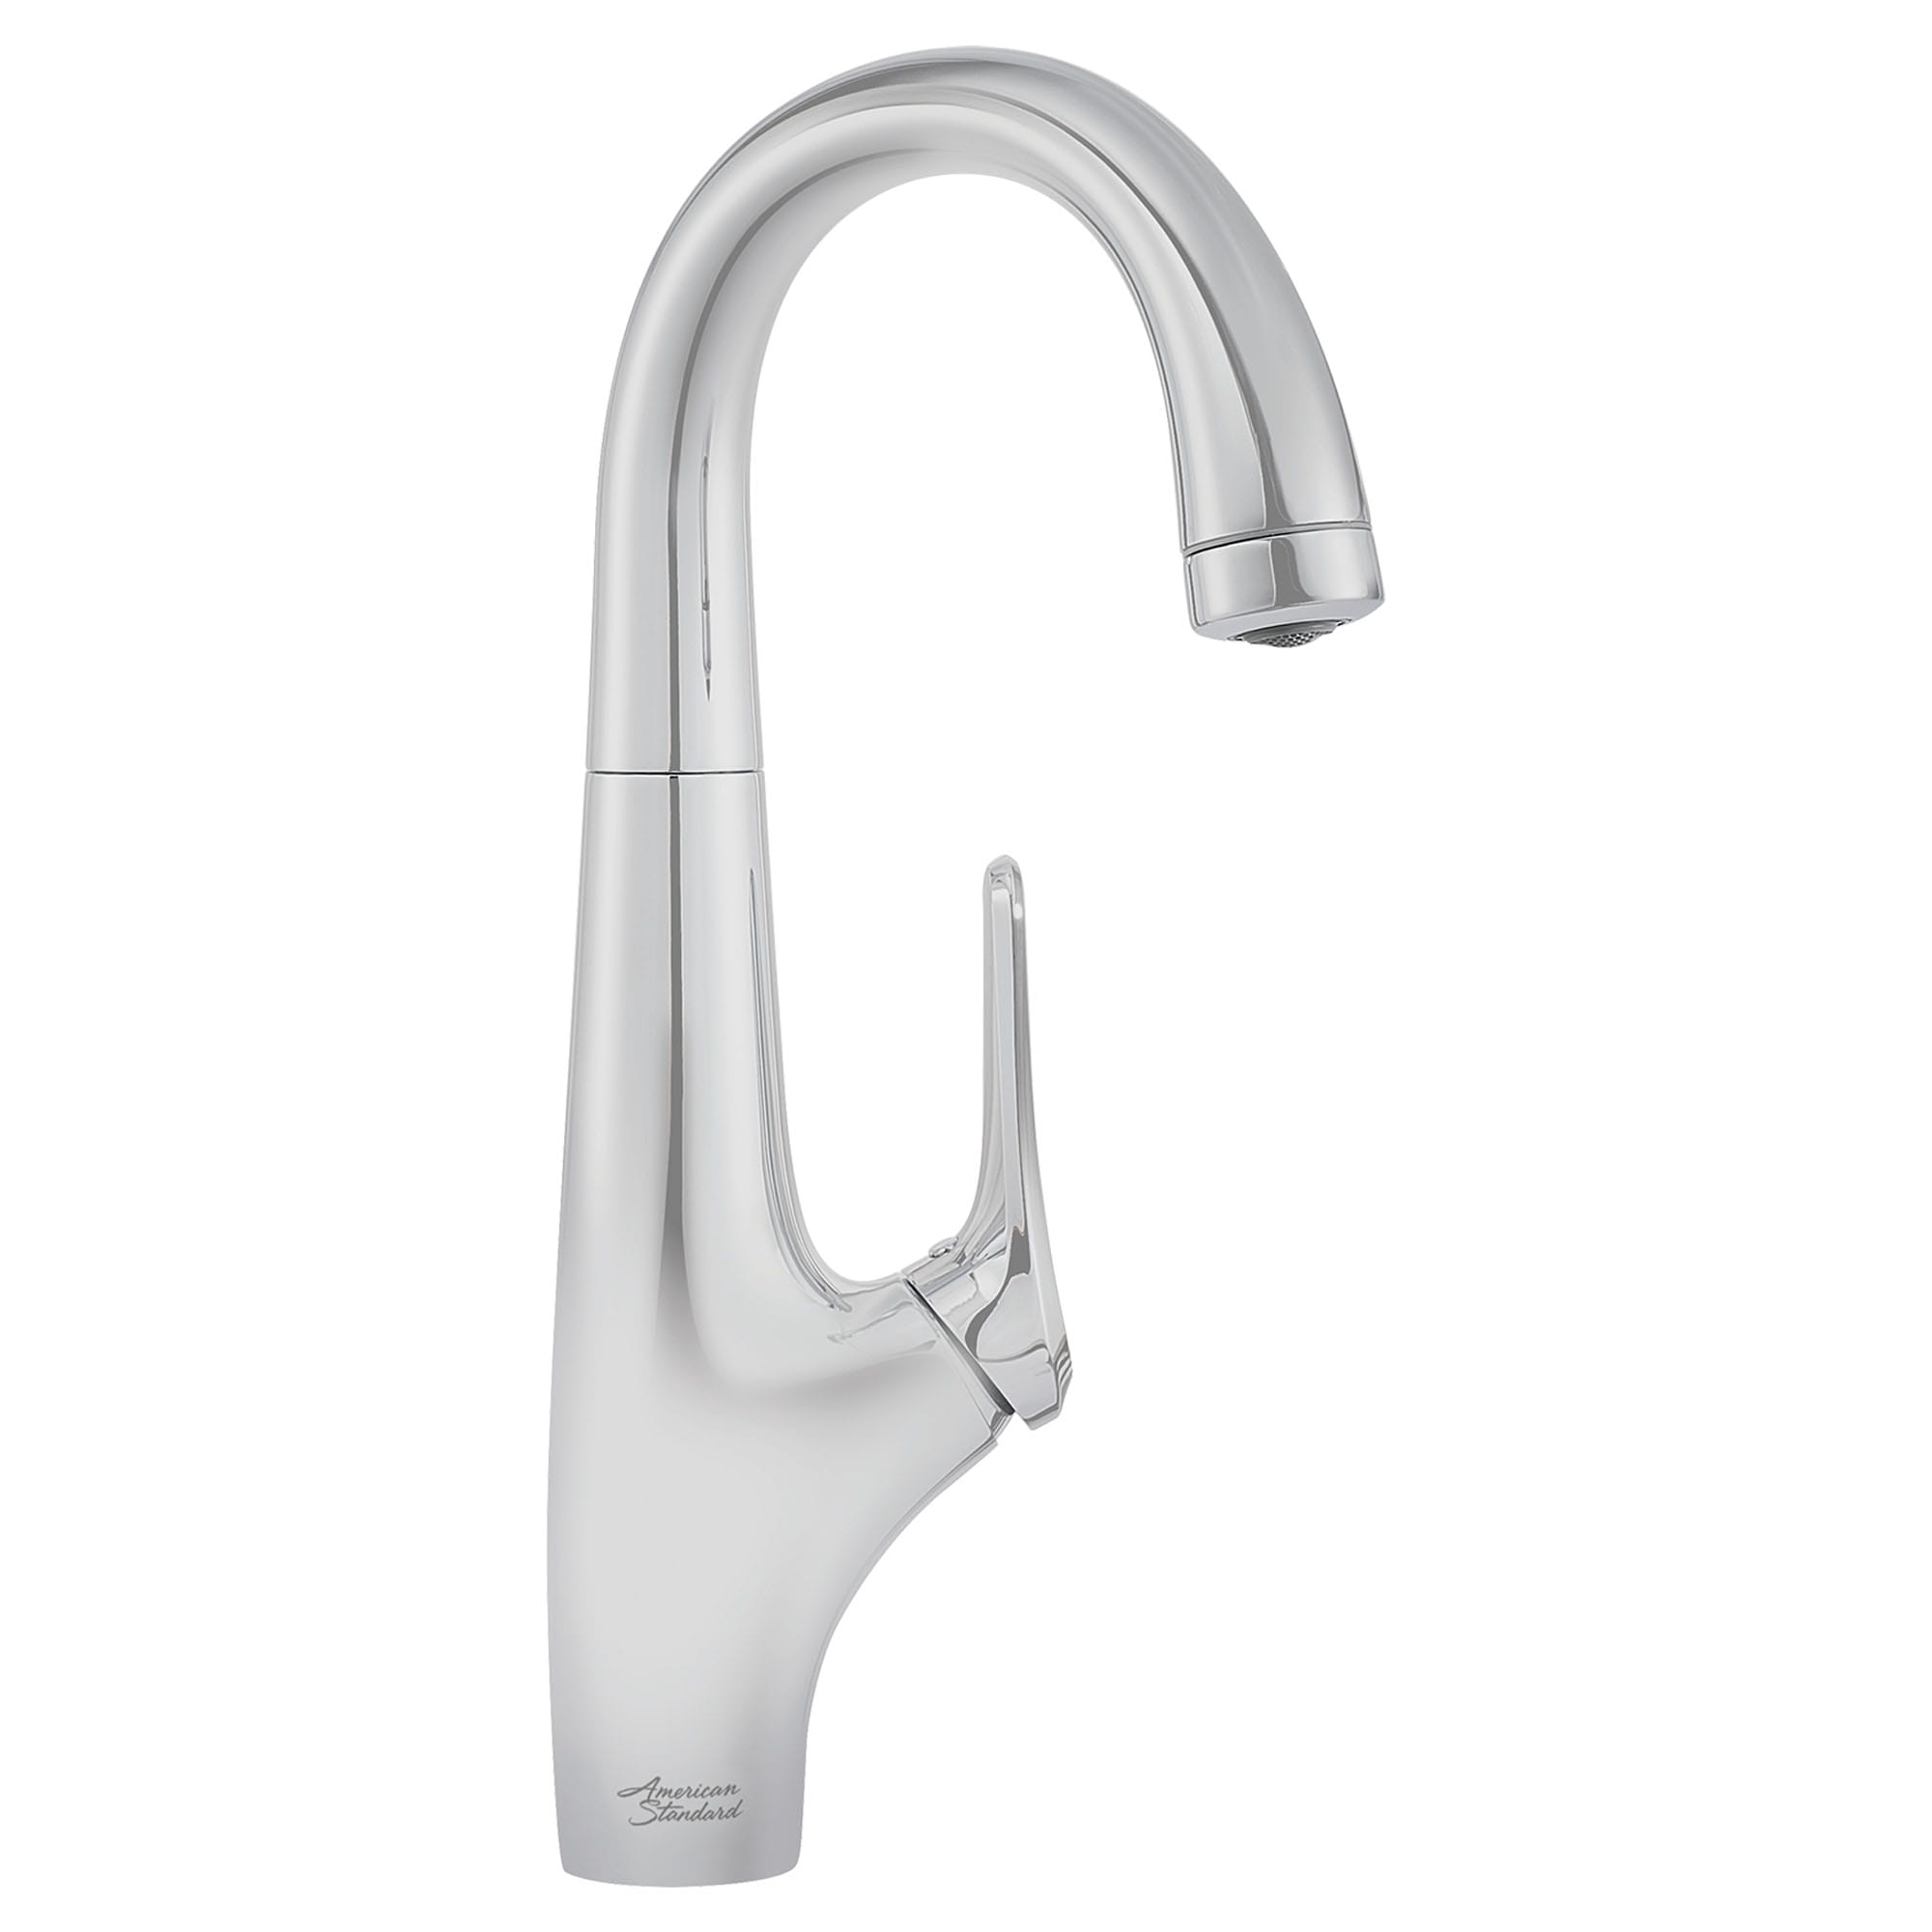 Avery® Single-Handle Pull-Down Single Spray Kitchen Faucet 1.5 gpm/5.7 L/min